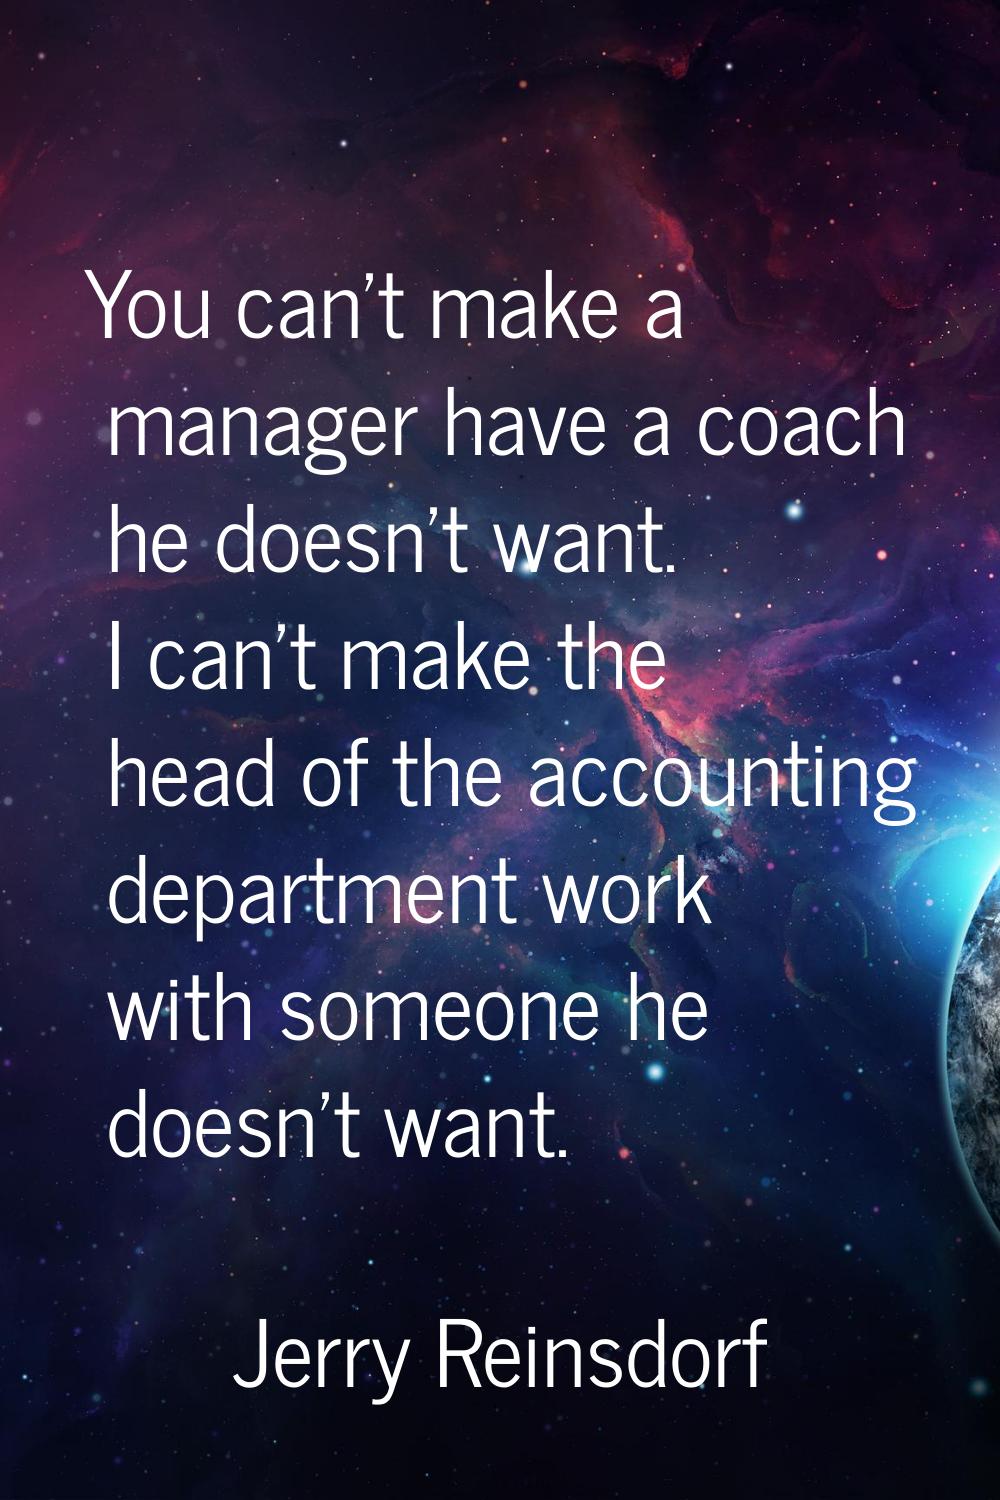 You can't make a manager have a coach he doesn't want. I can't make the head of the accounting depa